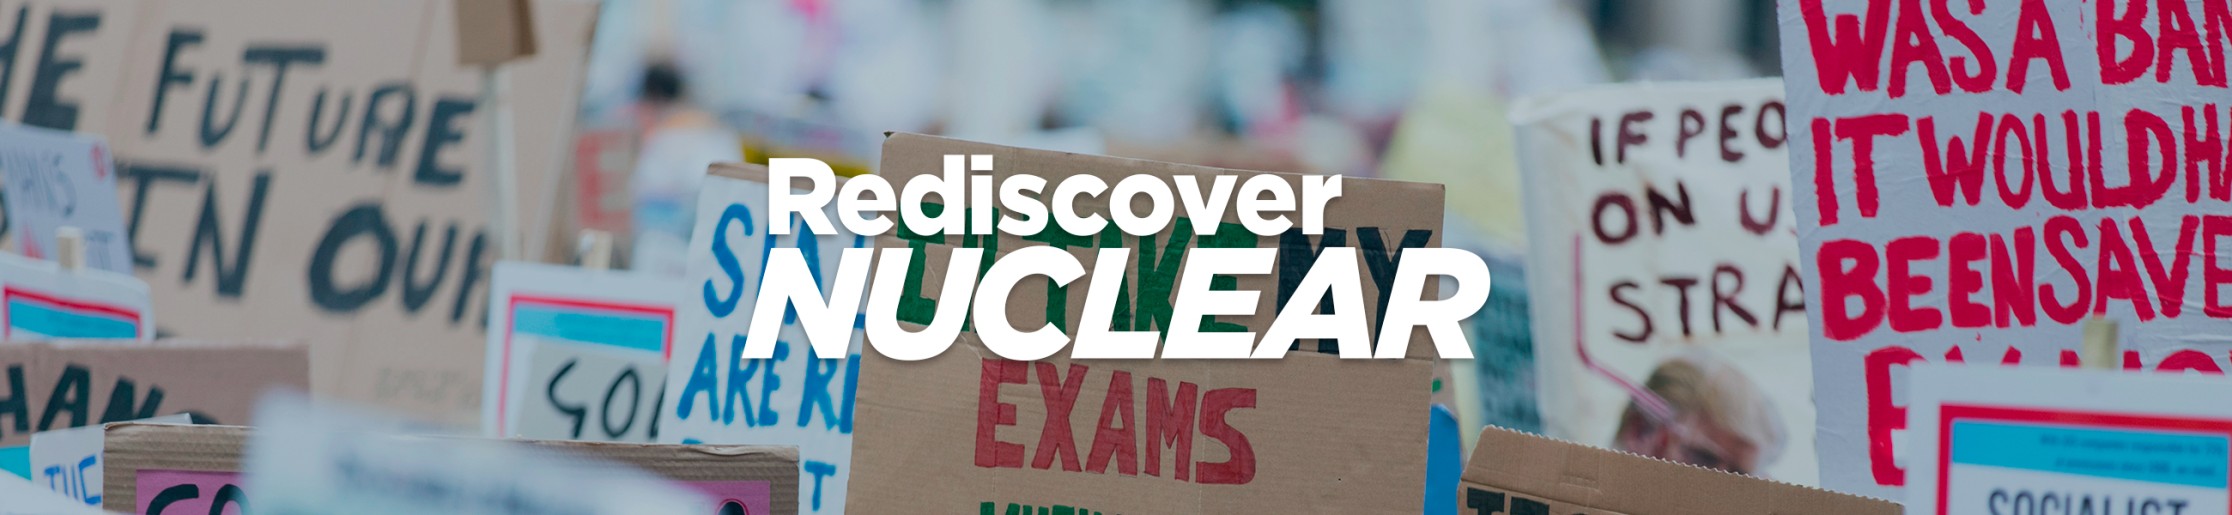 Rediscover Nuclear